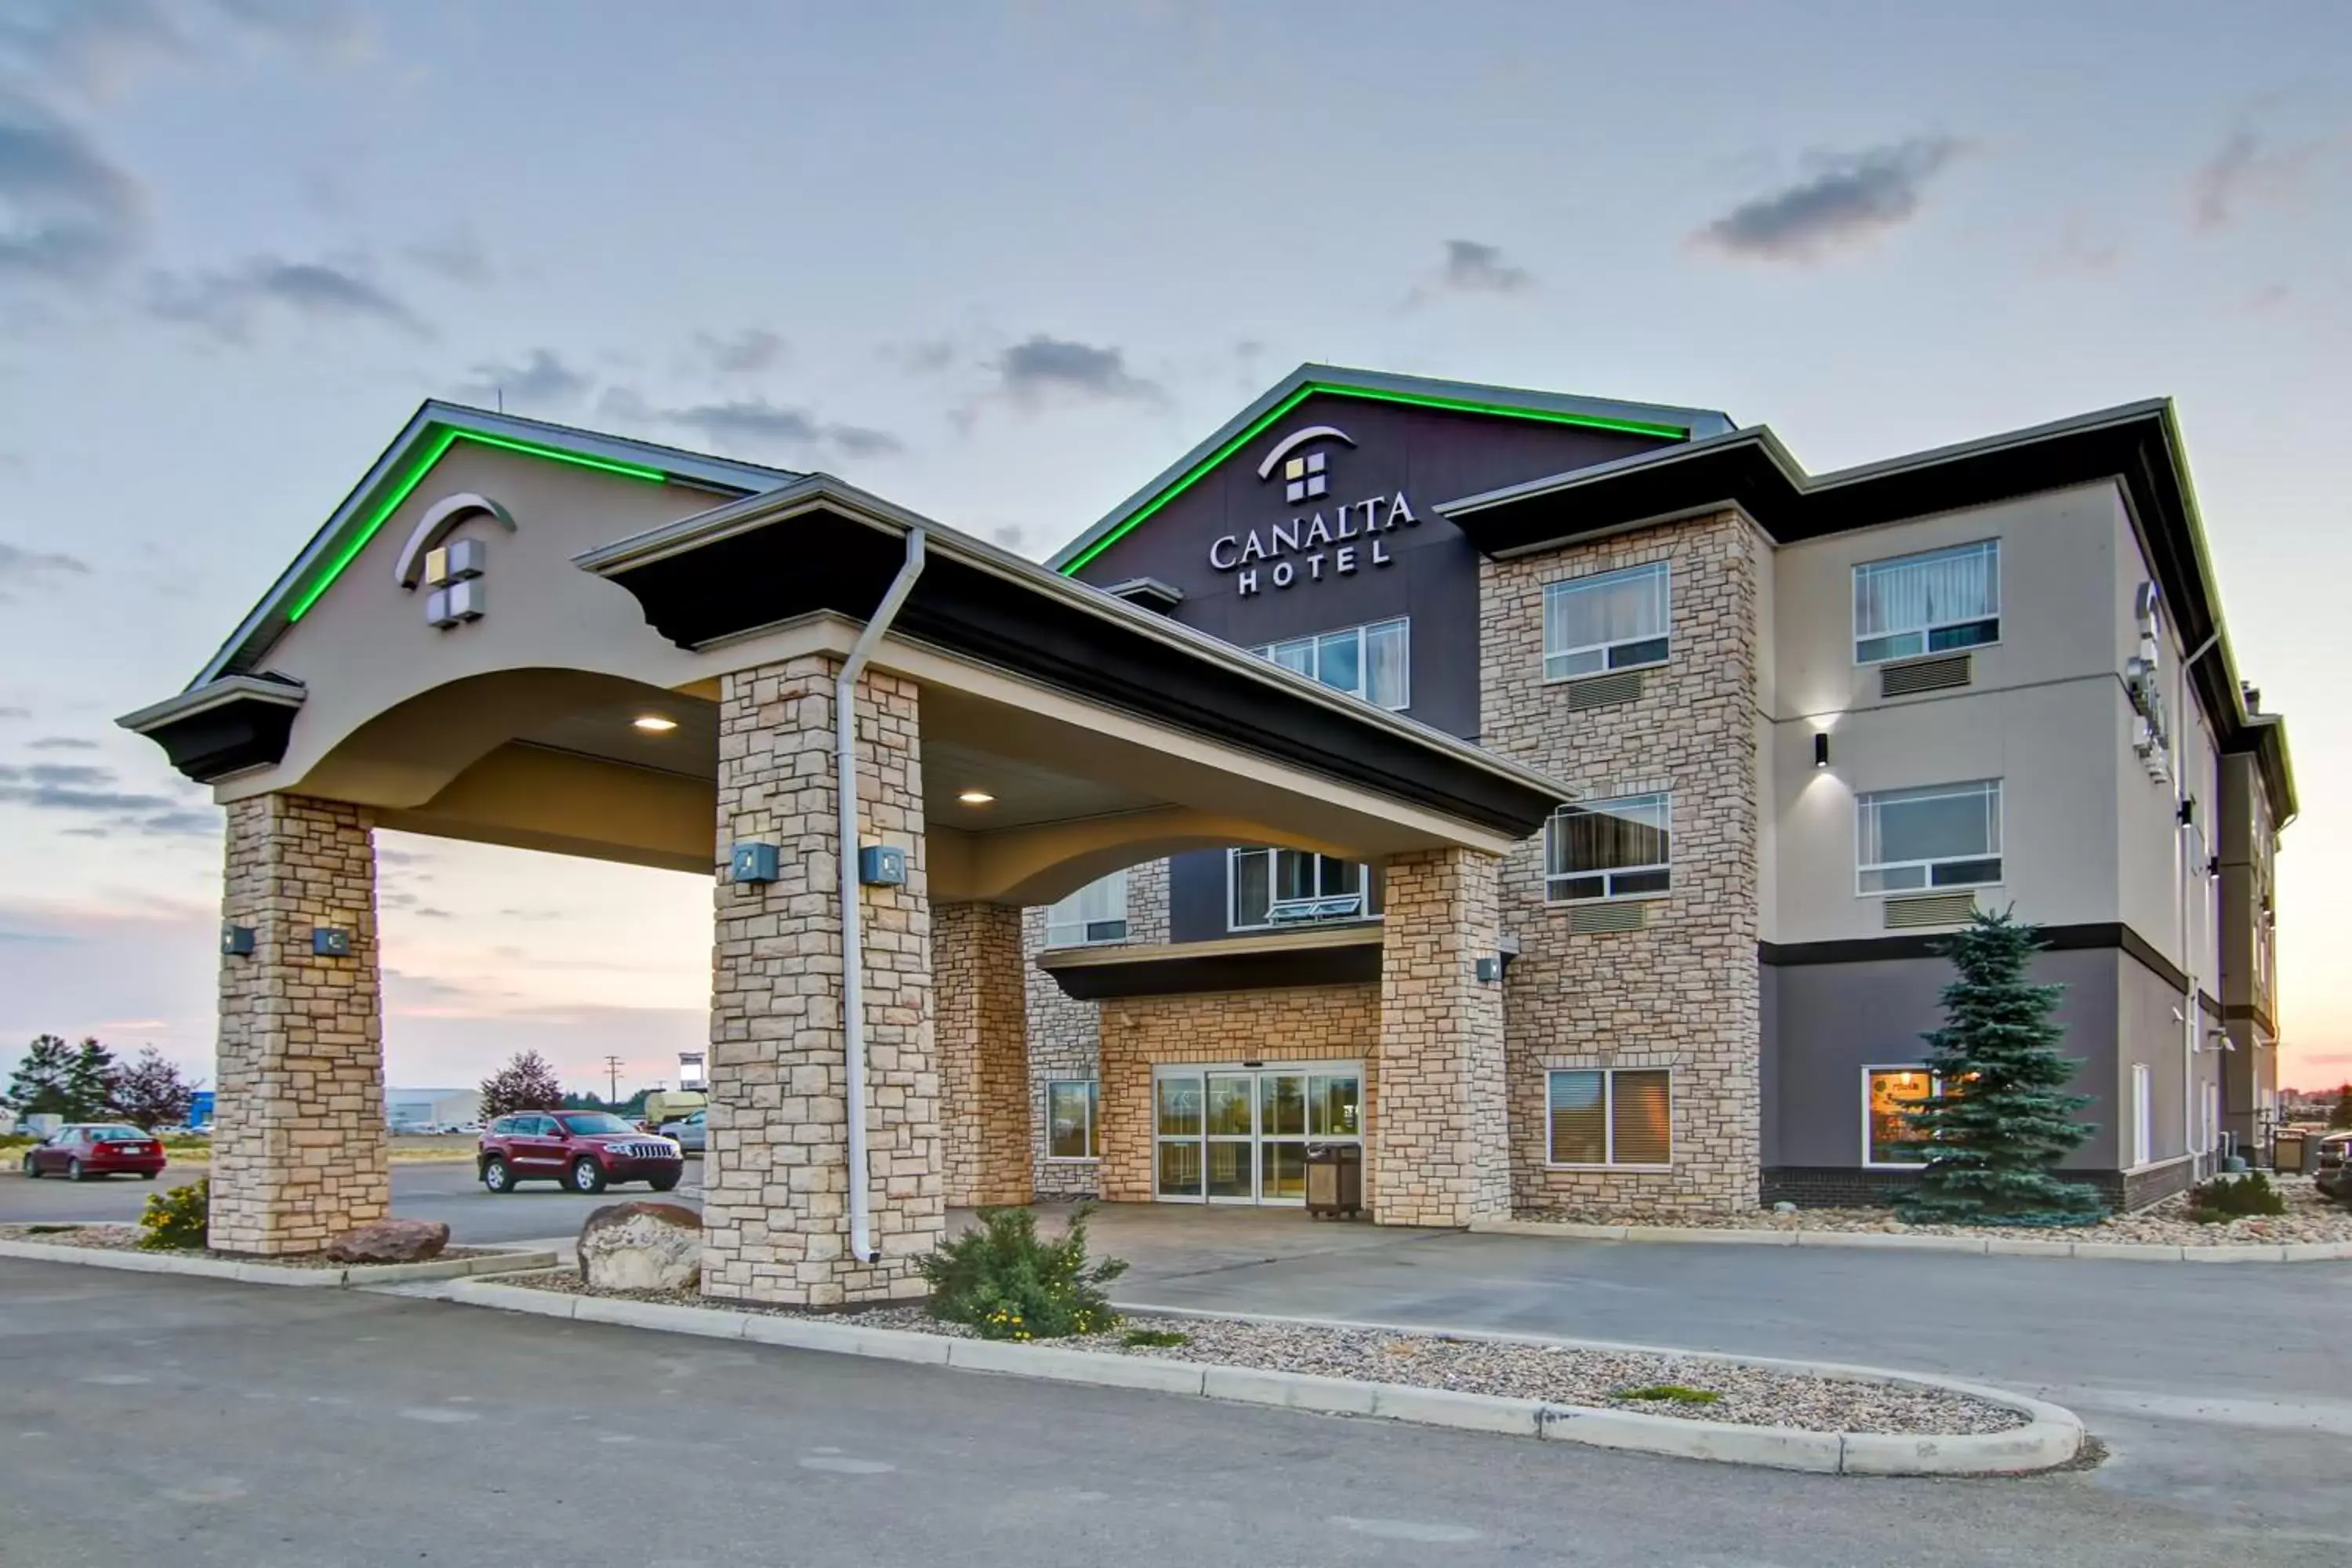 Property building in Canalta Hotel Assiniboia